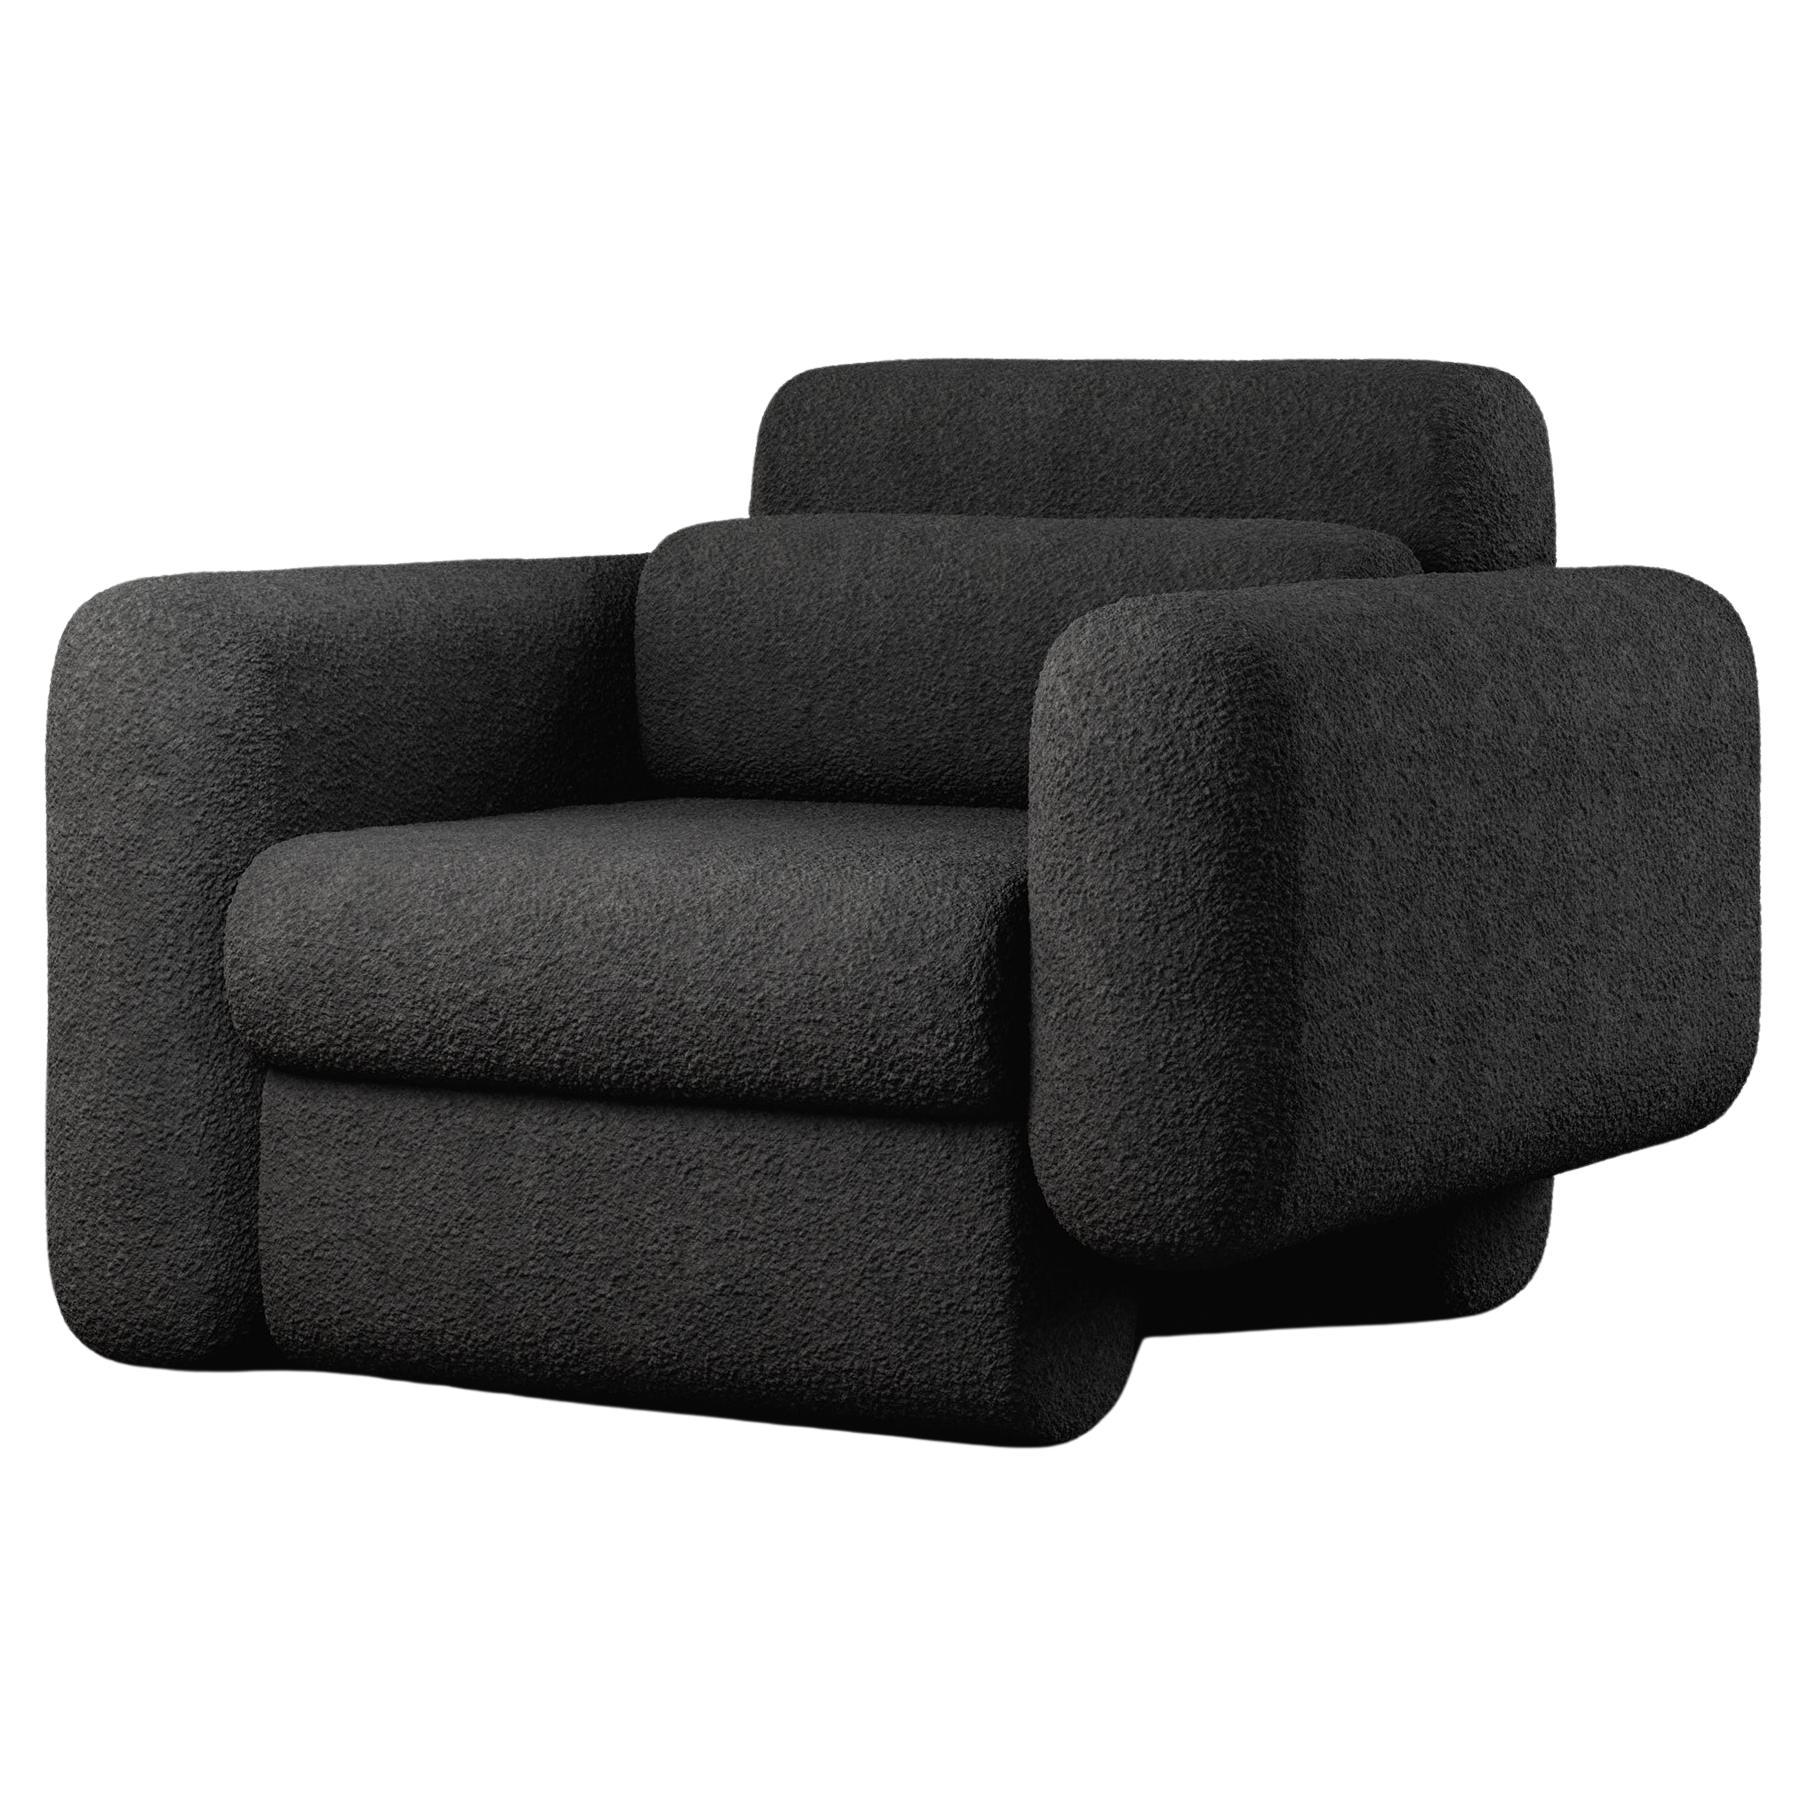 ASYM CHAIR - Modern Asymmetrical Sectional Chair in Black Boucle For Sale